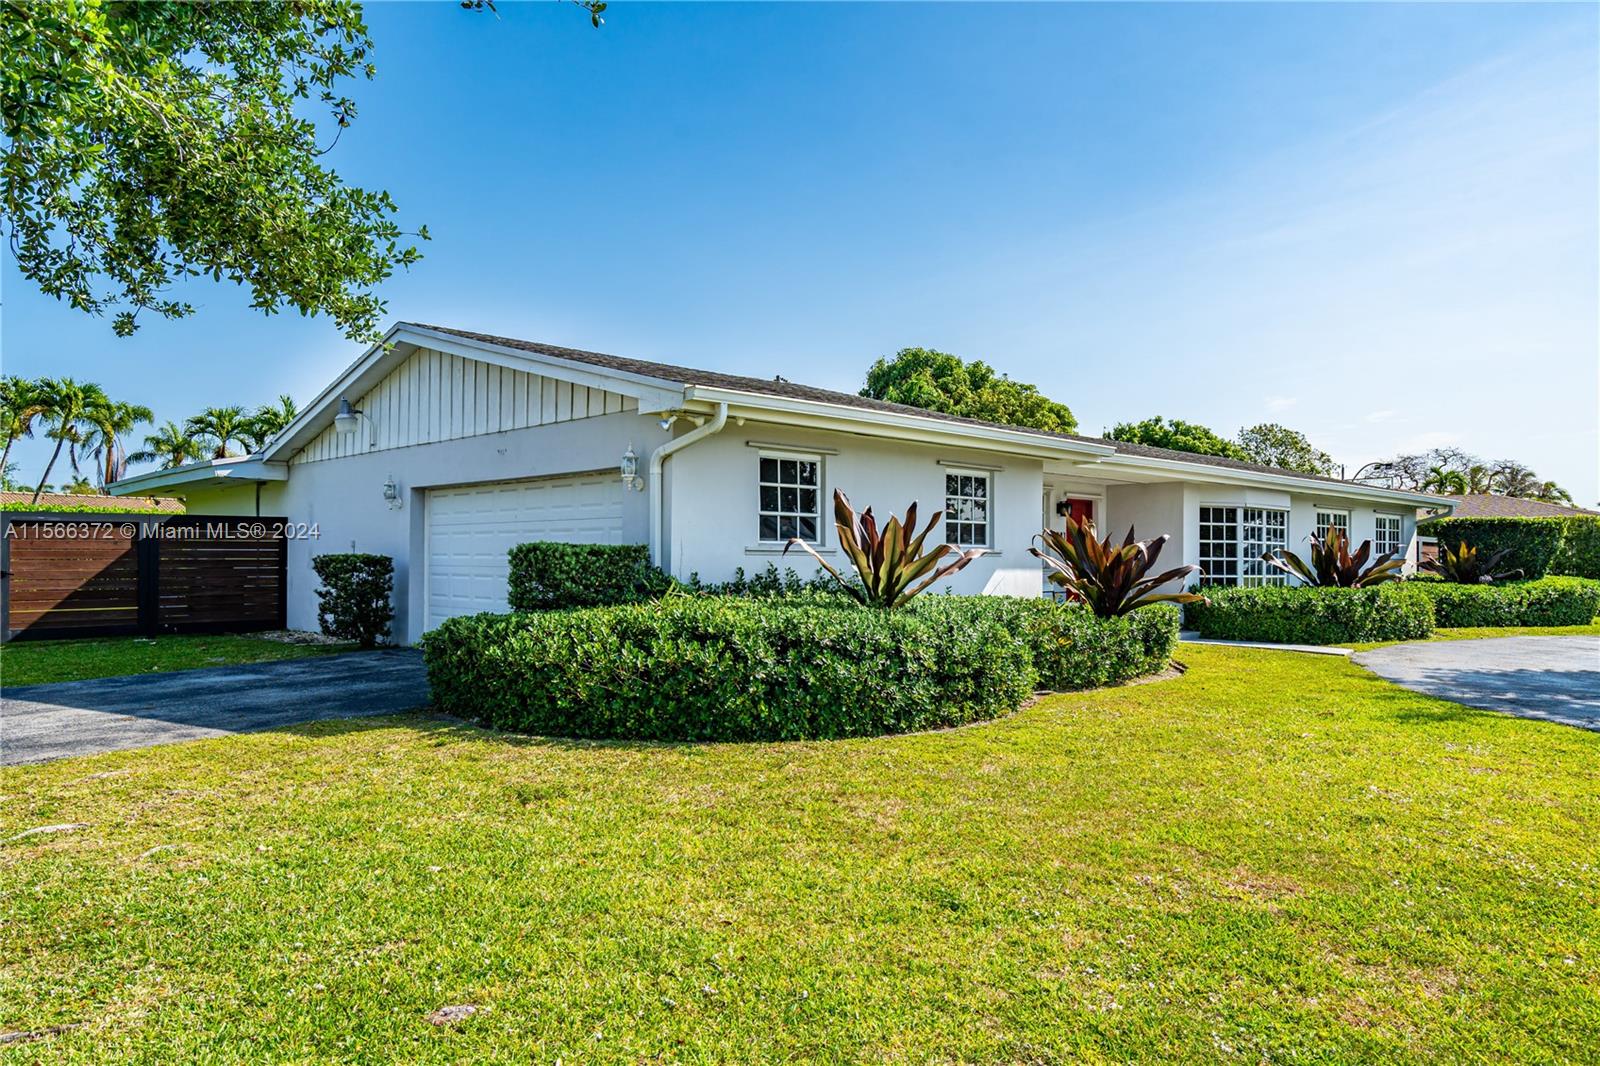 Open House - May 5th from 1:00pm-4:00pm! Welcome to your dream home in Kendall Point! This corner lot property offers 4 bedrooms, a bonus den, 2.5 bathrooms, a pool and a 2-car garage. The property features updated kitchen and bathrooms with travertine flooring throughout and a lot of natural light. Relax in the fenced-in yard with the pool and plenty of space to entertain! The yard also has plenty of space to park your boat, RV or any of your toys. Conveniently located near Palmetto Expressway, restaurants, Dadeland Mall, and Baptist Hospital. Don't miss out on this exceptional opportunity!